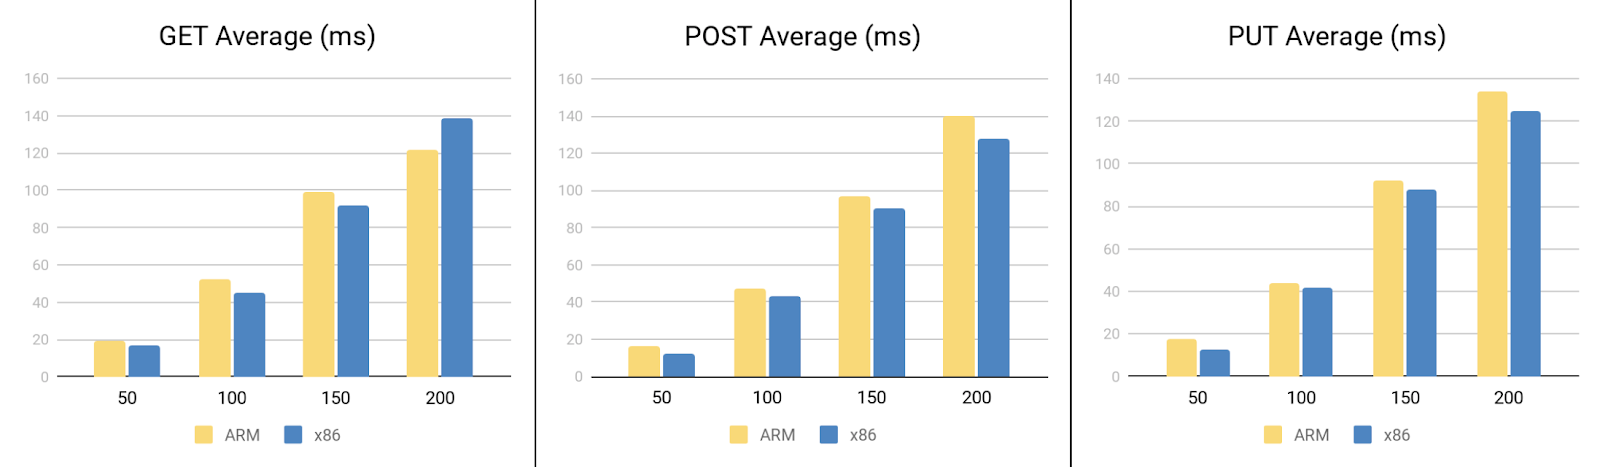 Response latency of GET, POST, and PUT